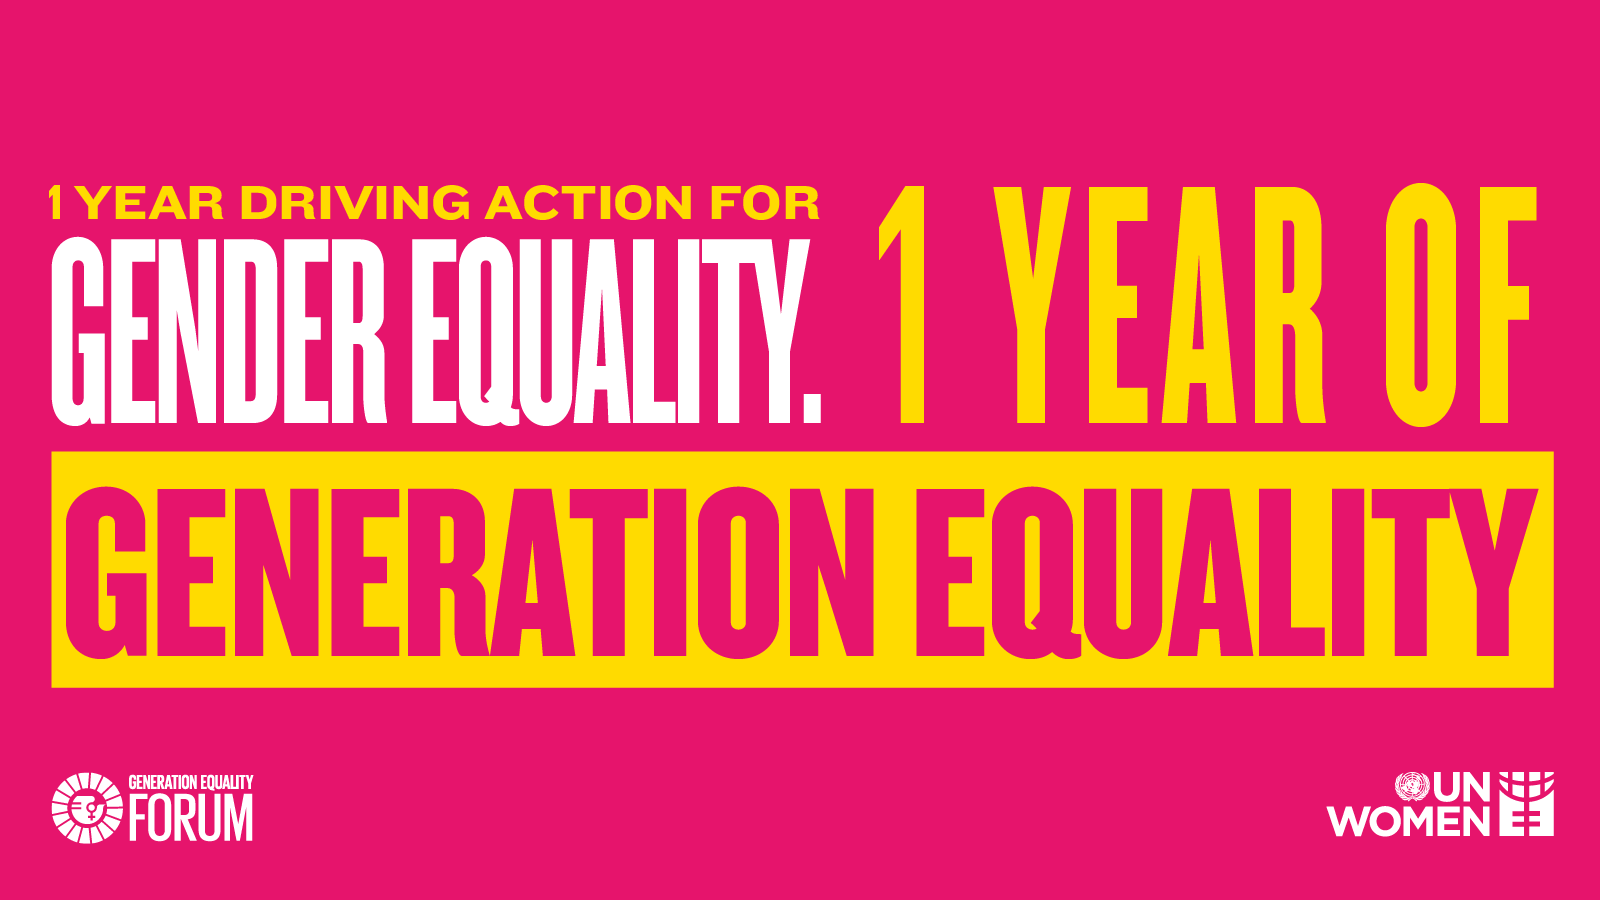 Yellow and white bold text against a bright pink background reads: 1 Year driving action for gender equality. 1 Year of Generation Equality. UN Women logos and Generation Equality Forum logos are at the bottom.